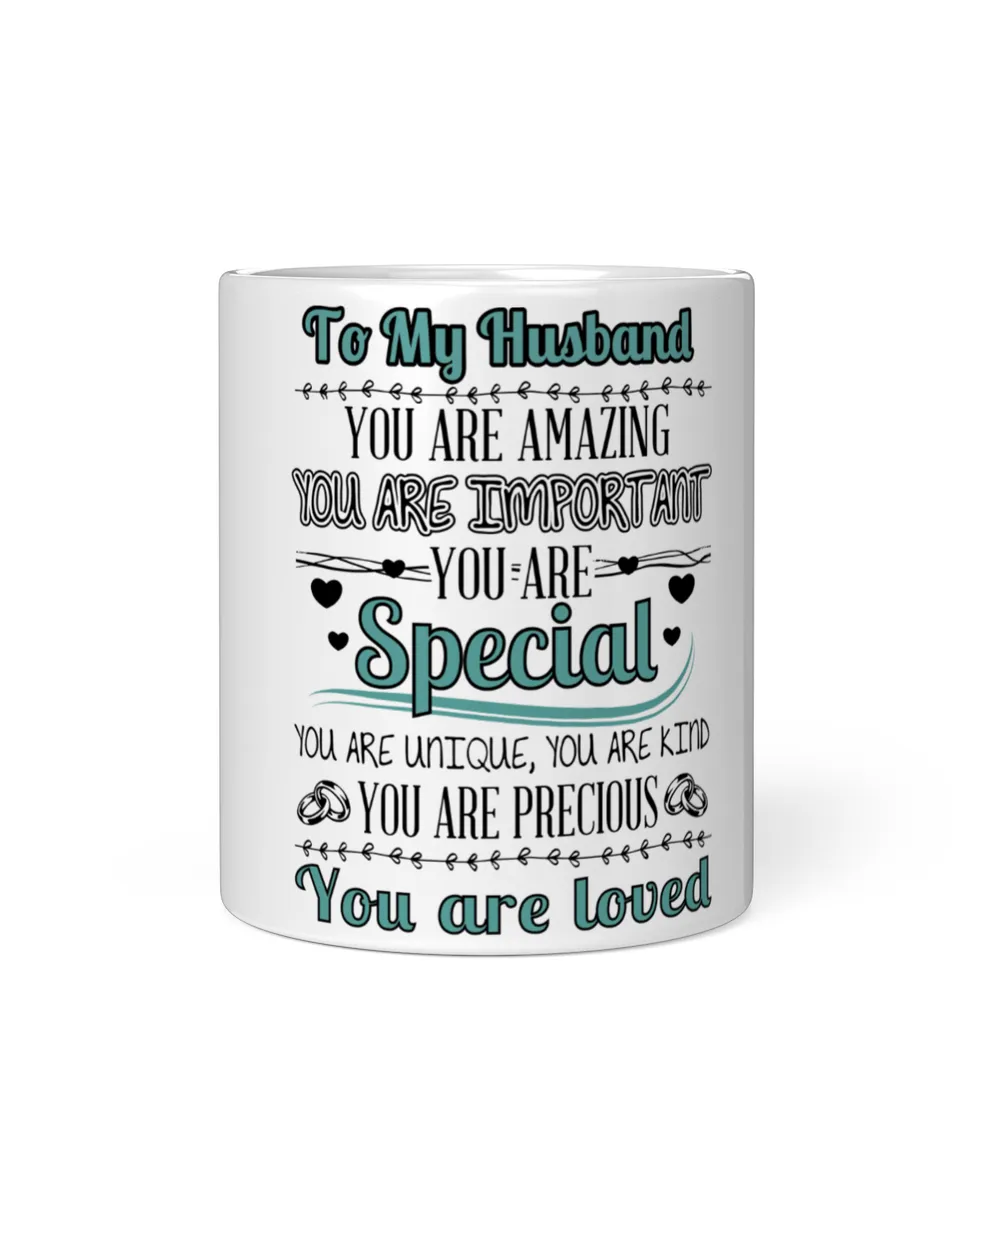 To my husband you are amazing you are imprtant you are special you are unique, you are kind you are precious you are loved